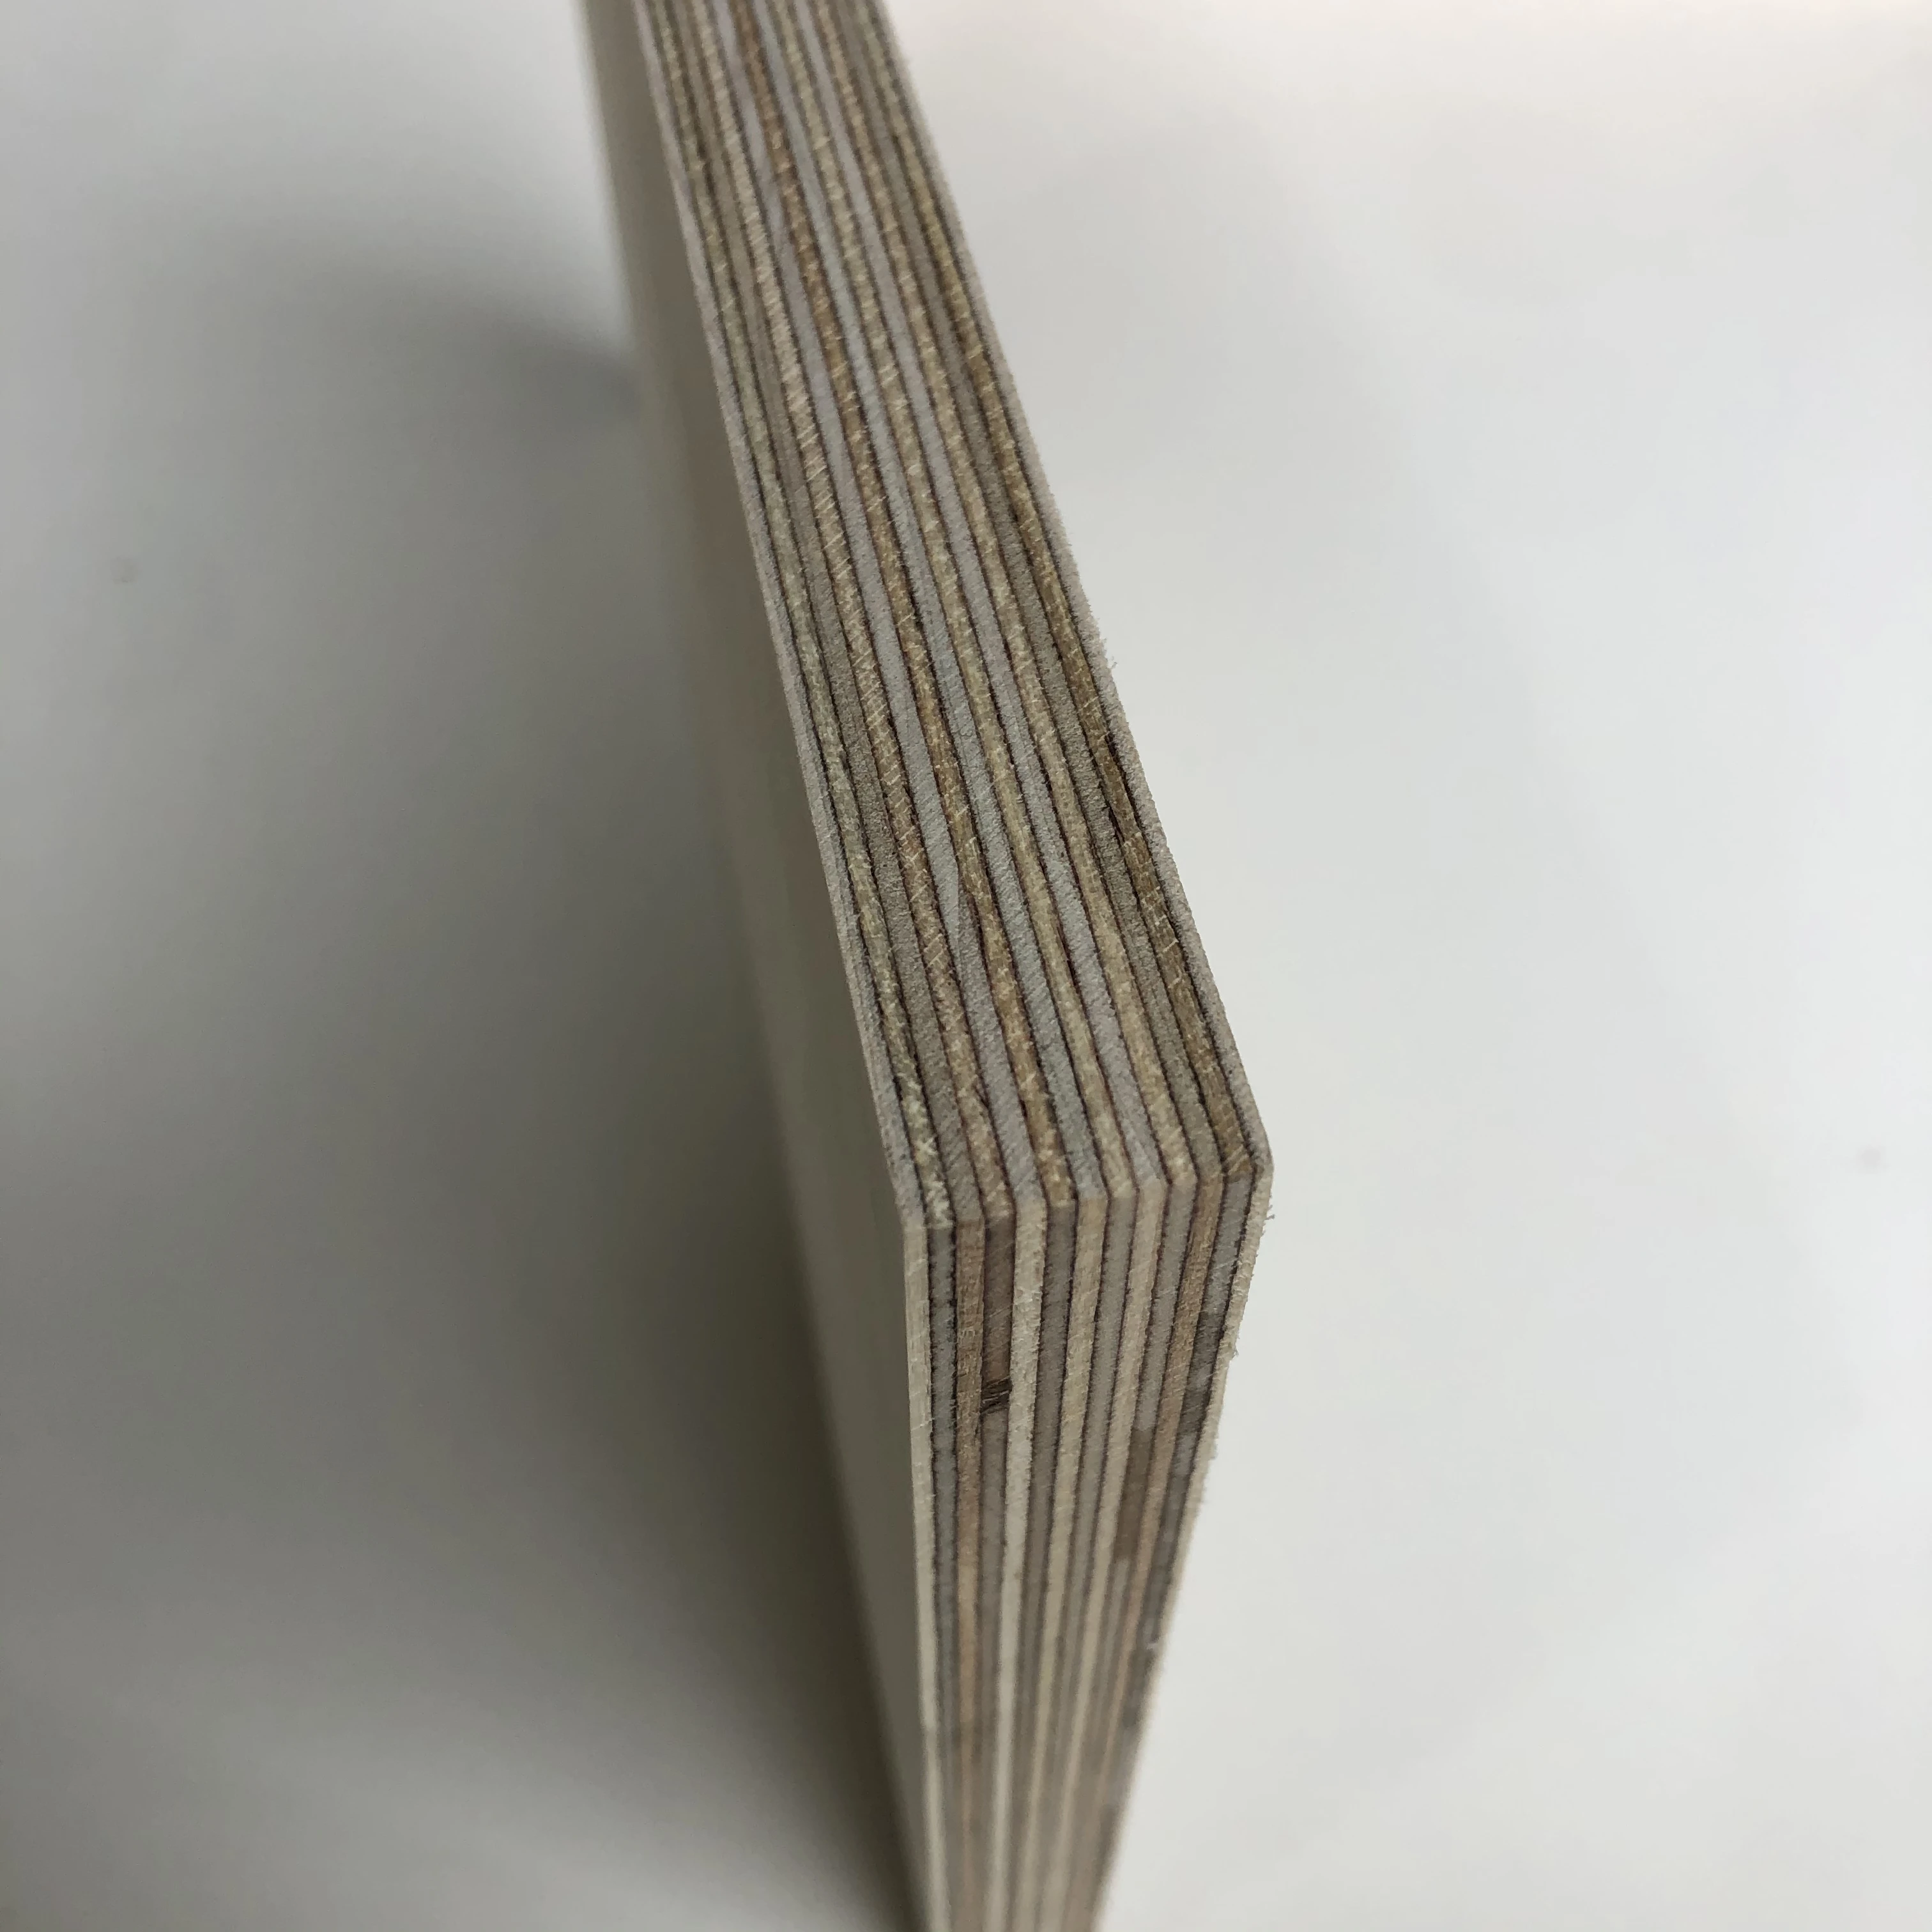 Factory price baltic birch plywood 3mm 12mm 18mm full birch commercial plywood birch sheets